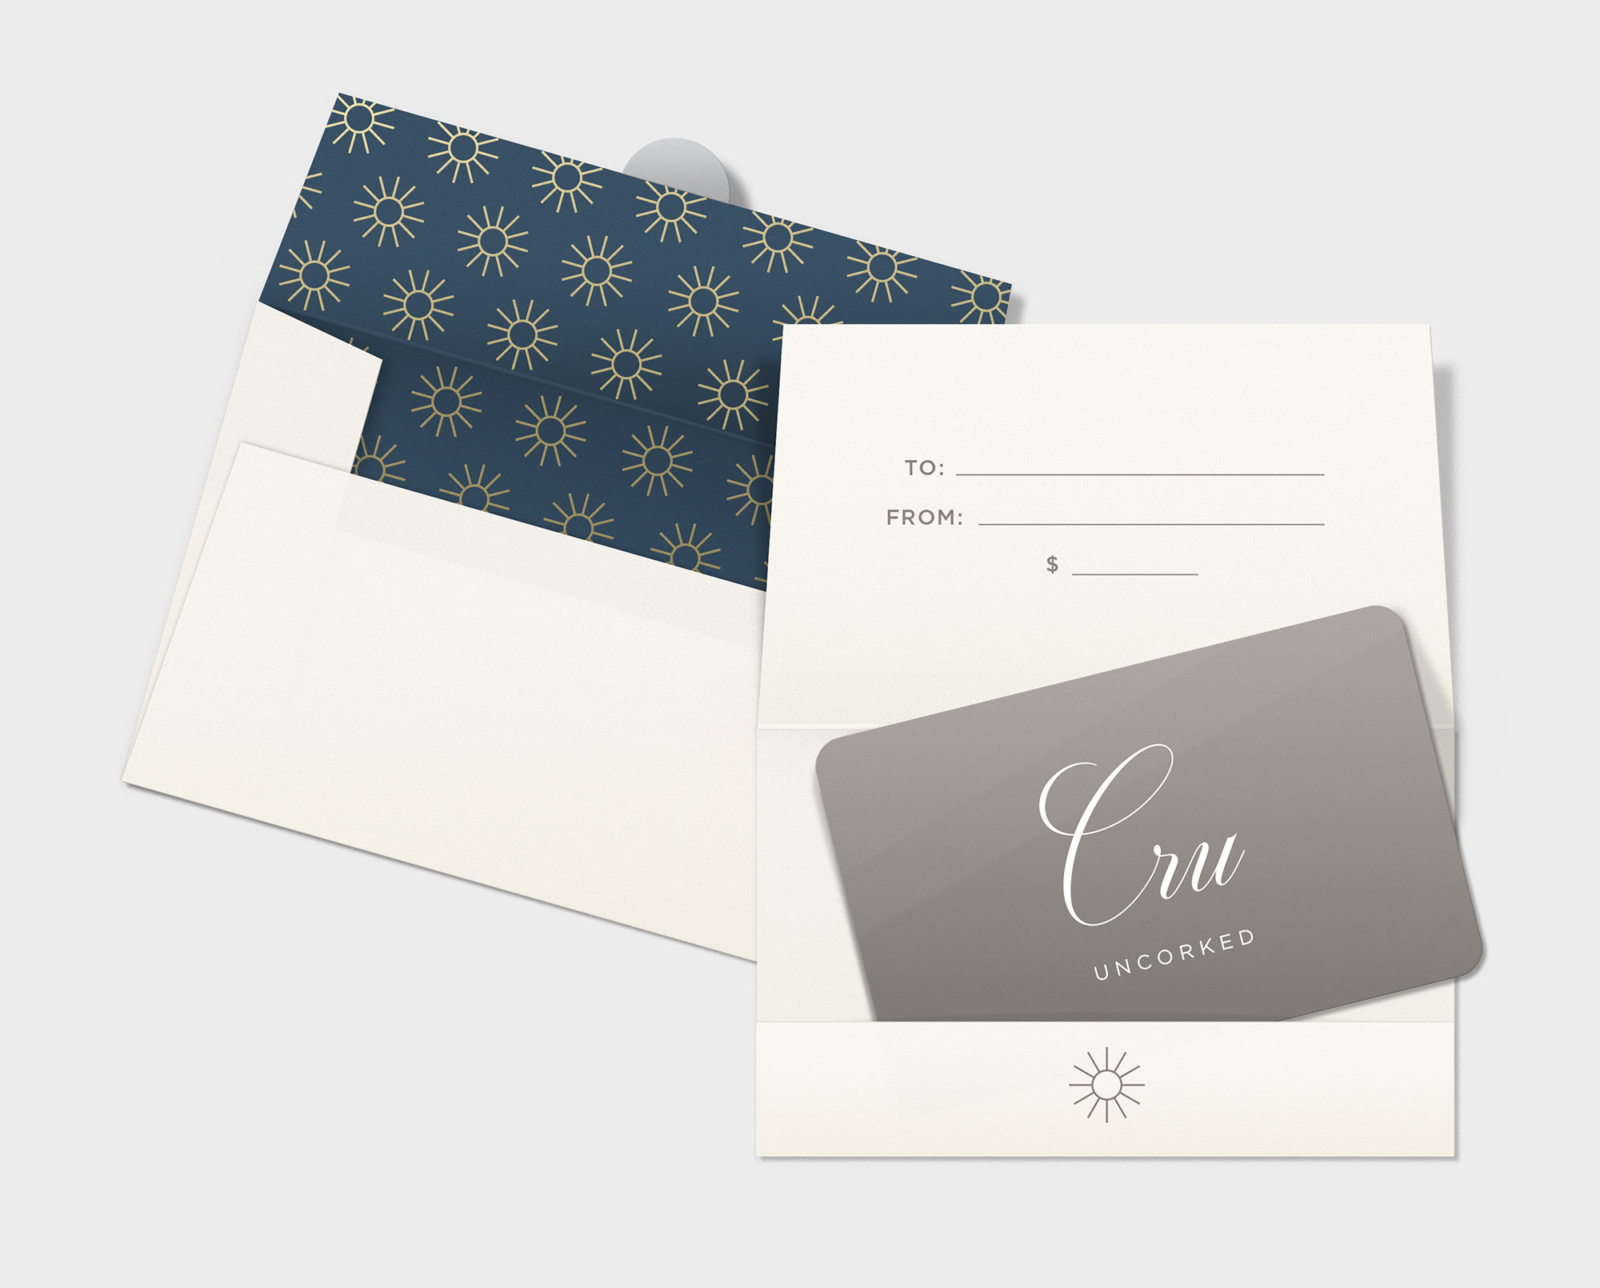 Cru Uncorked gift card and branded envelope